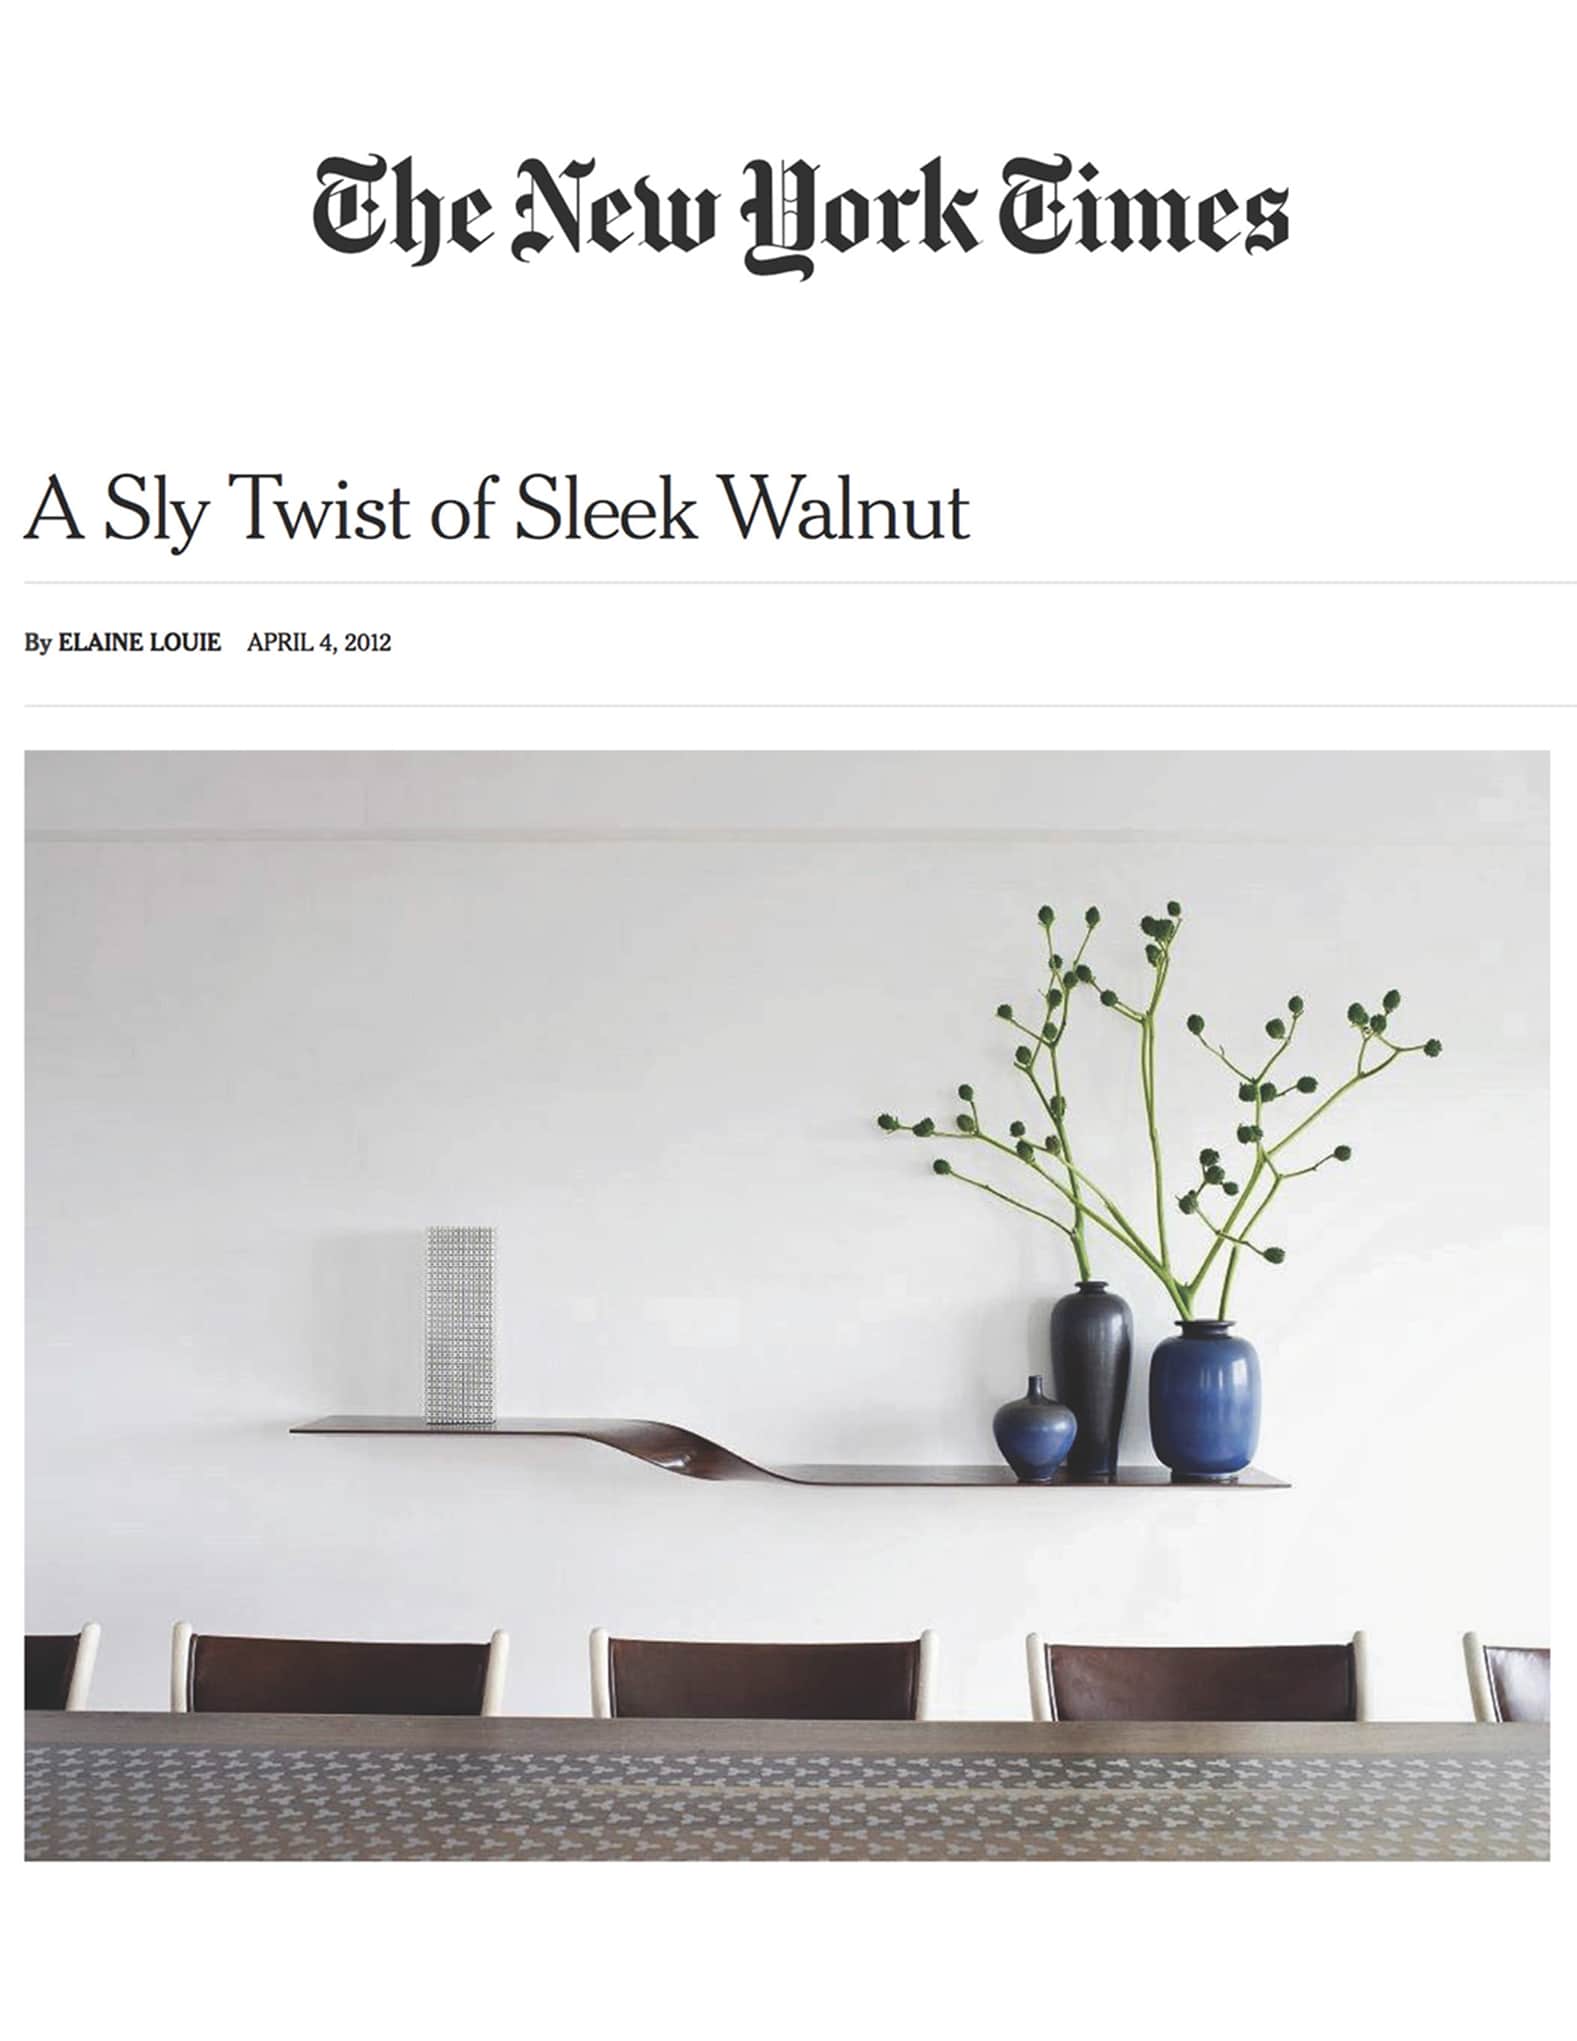 An image of the cover of April 2012 of New York Times Article featuring interior design by Carol Egan Interiors.